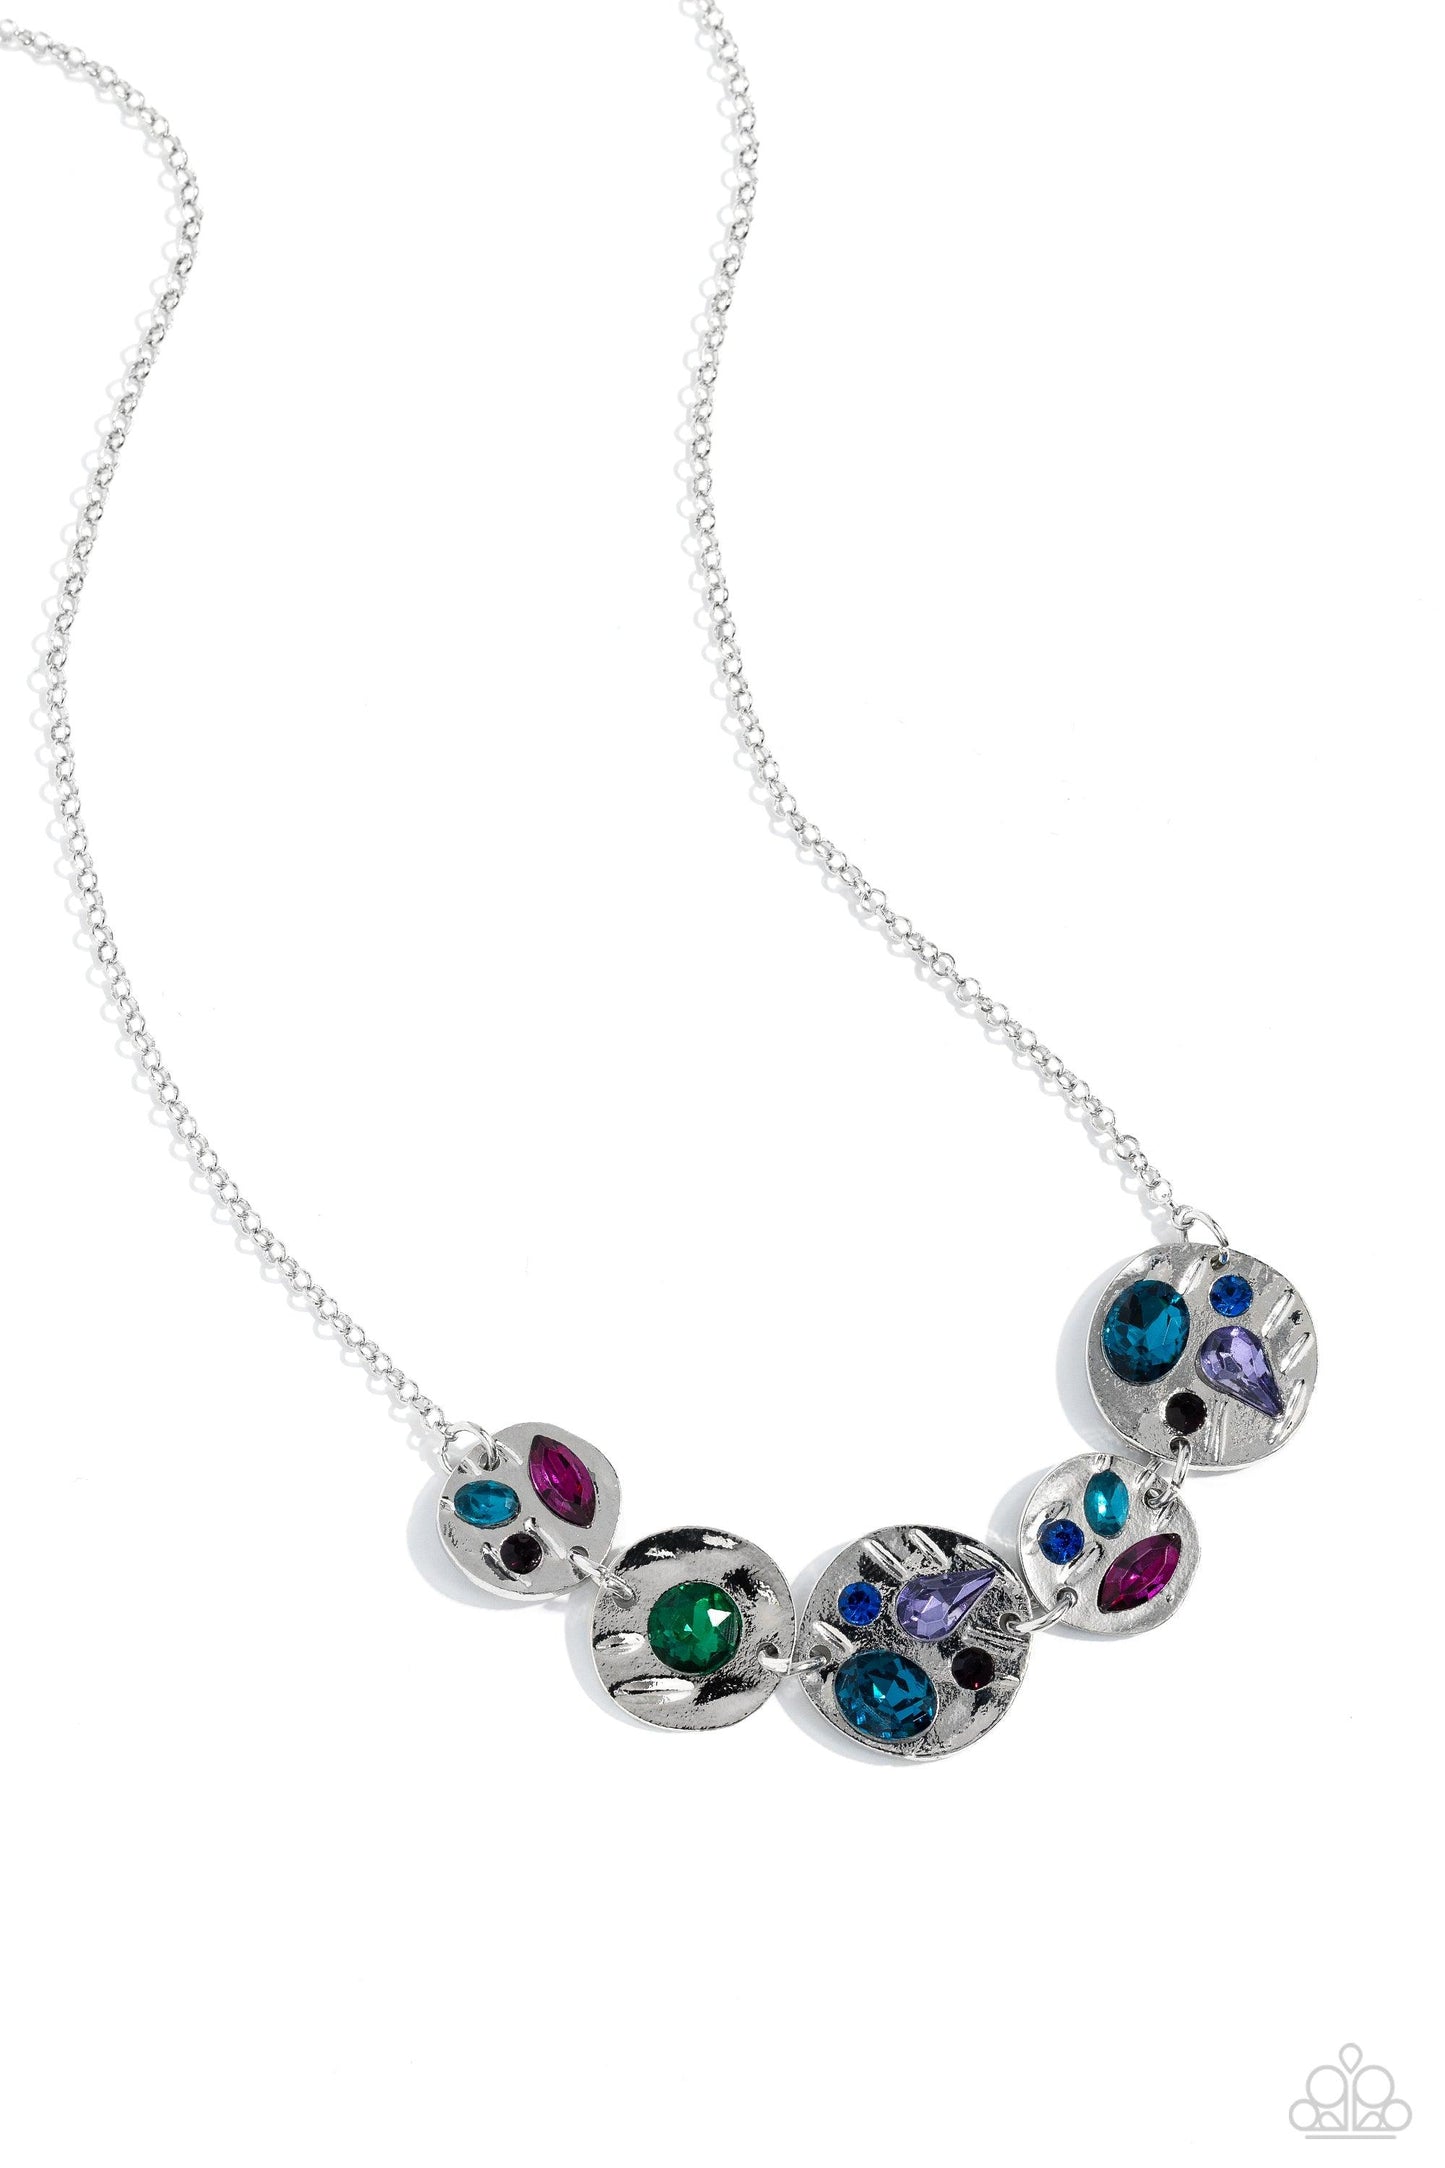 Paparazzi Accessories - Handcrafted Honor - Multicolor Necklace - Bling by JessieK